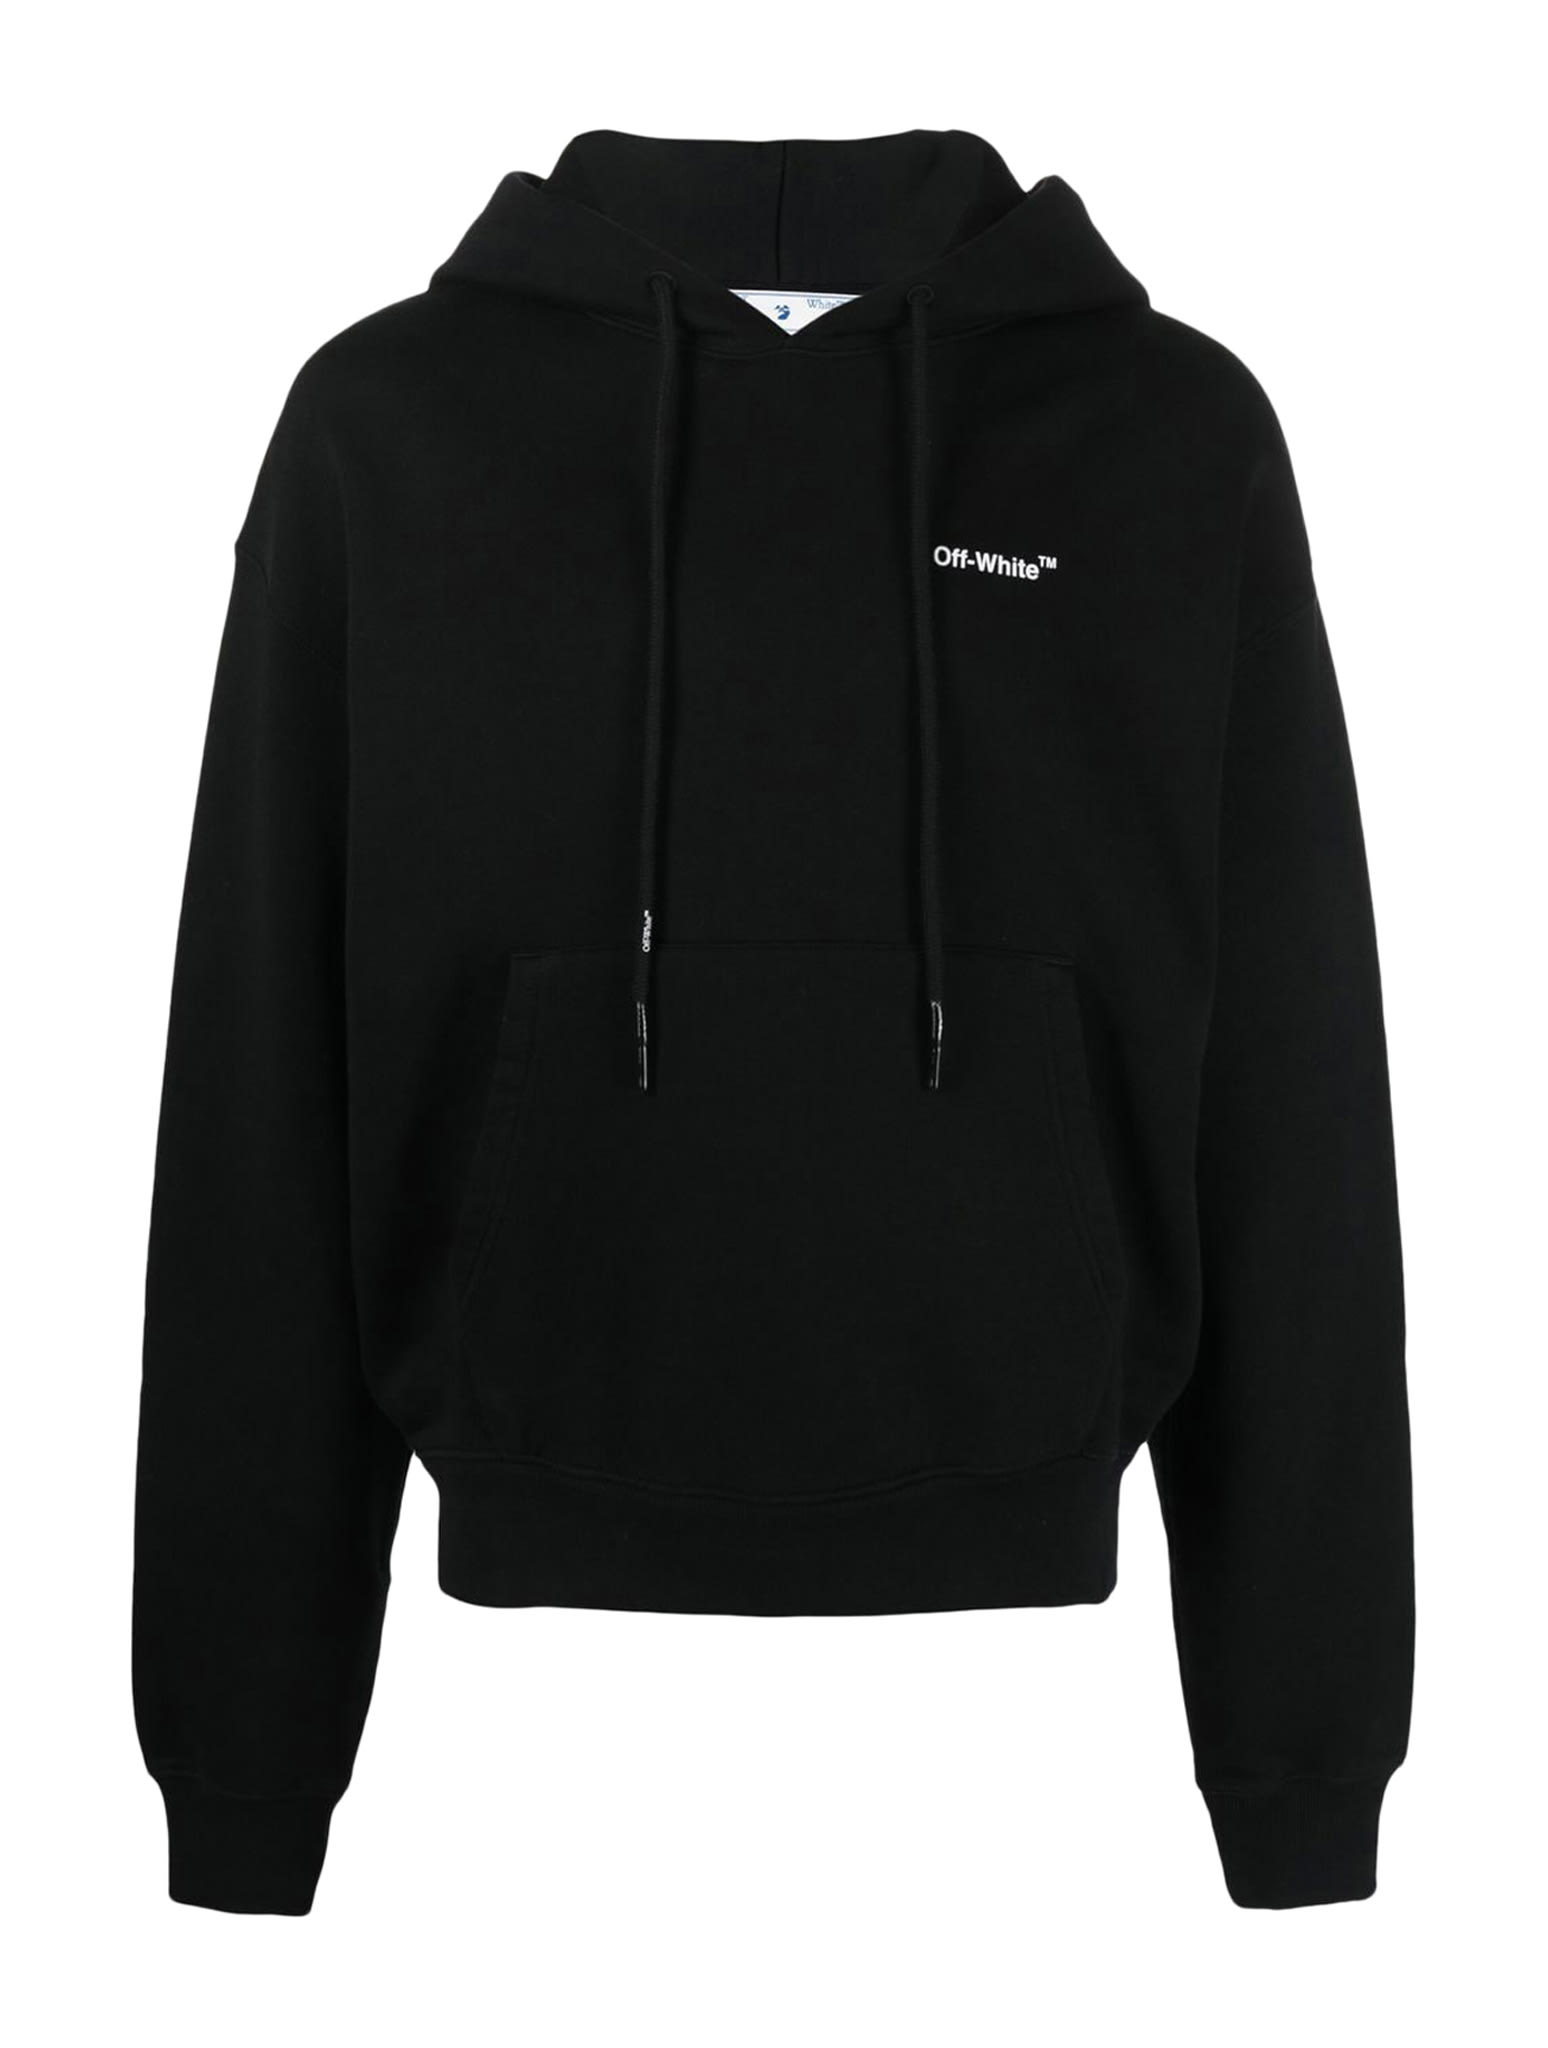 Off-White Caravag Crowning Over Hoodie Black White